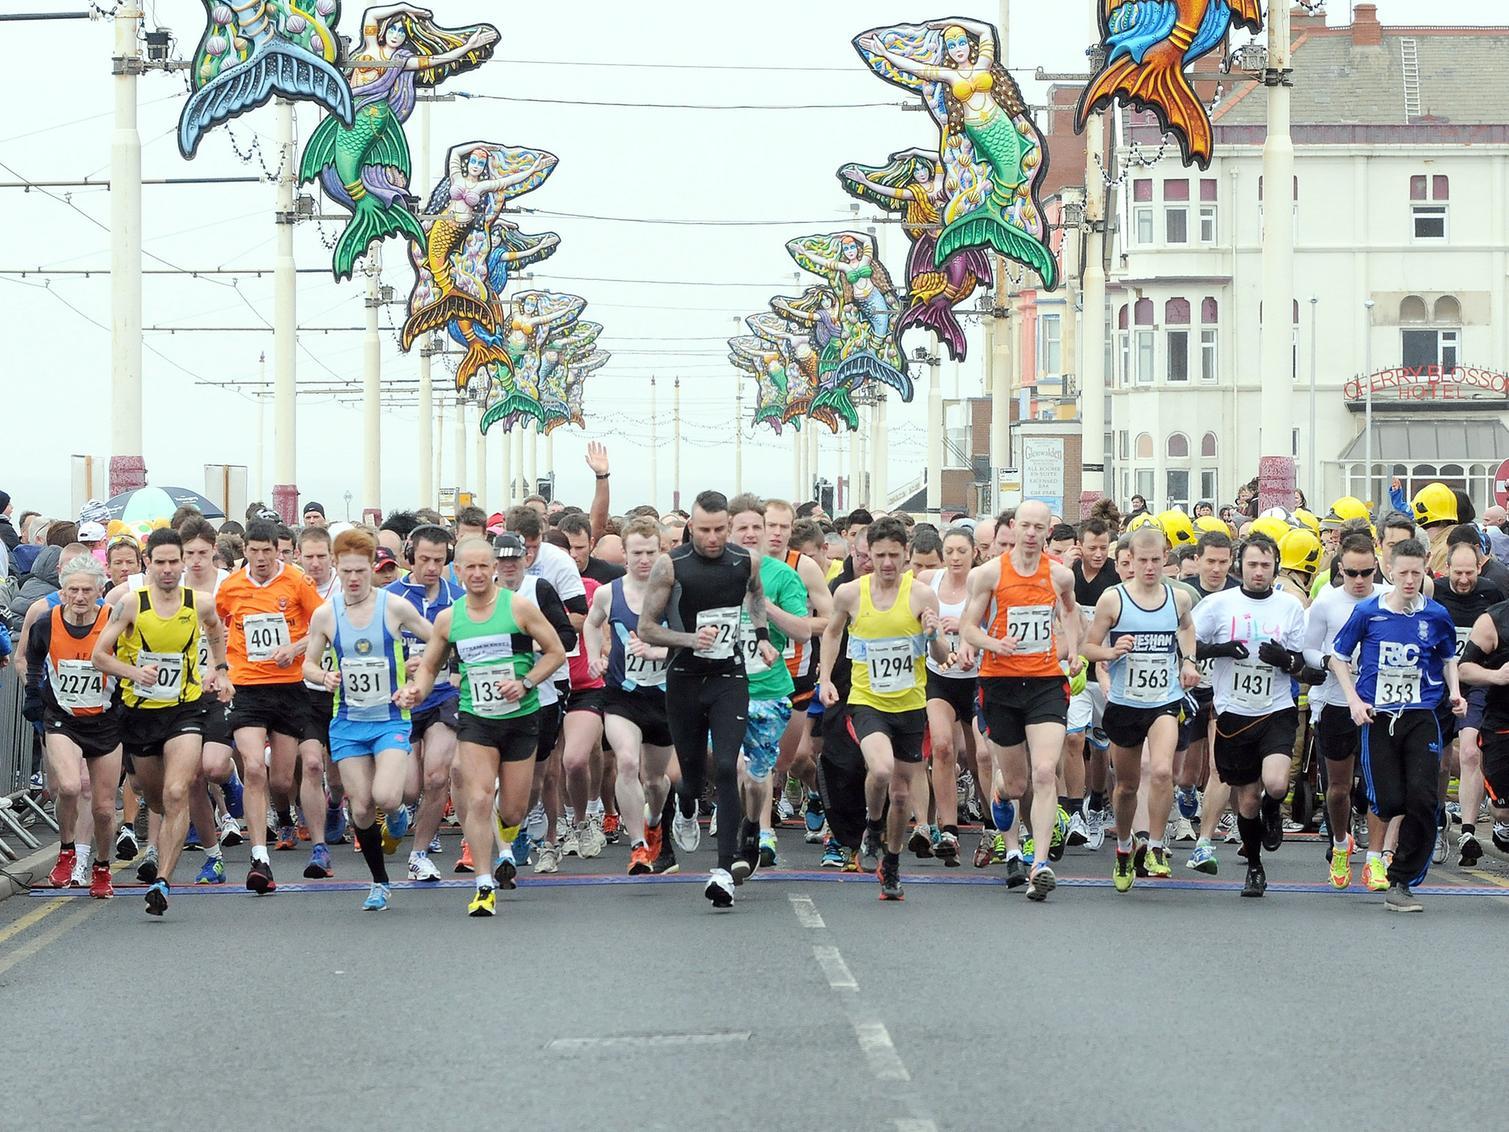 The Beaverbrooks Blackpool 10k Fun Run is back on Sunday May 10, 2020. Suitable for both new and experienced runners, anyone from the age of 11 upwards can take part. Entry tickets from 8 pounds.